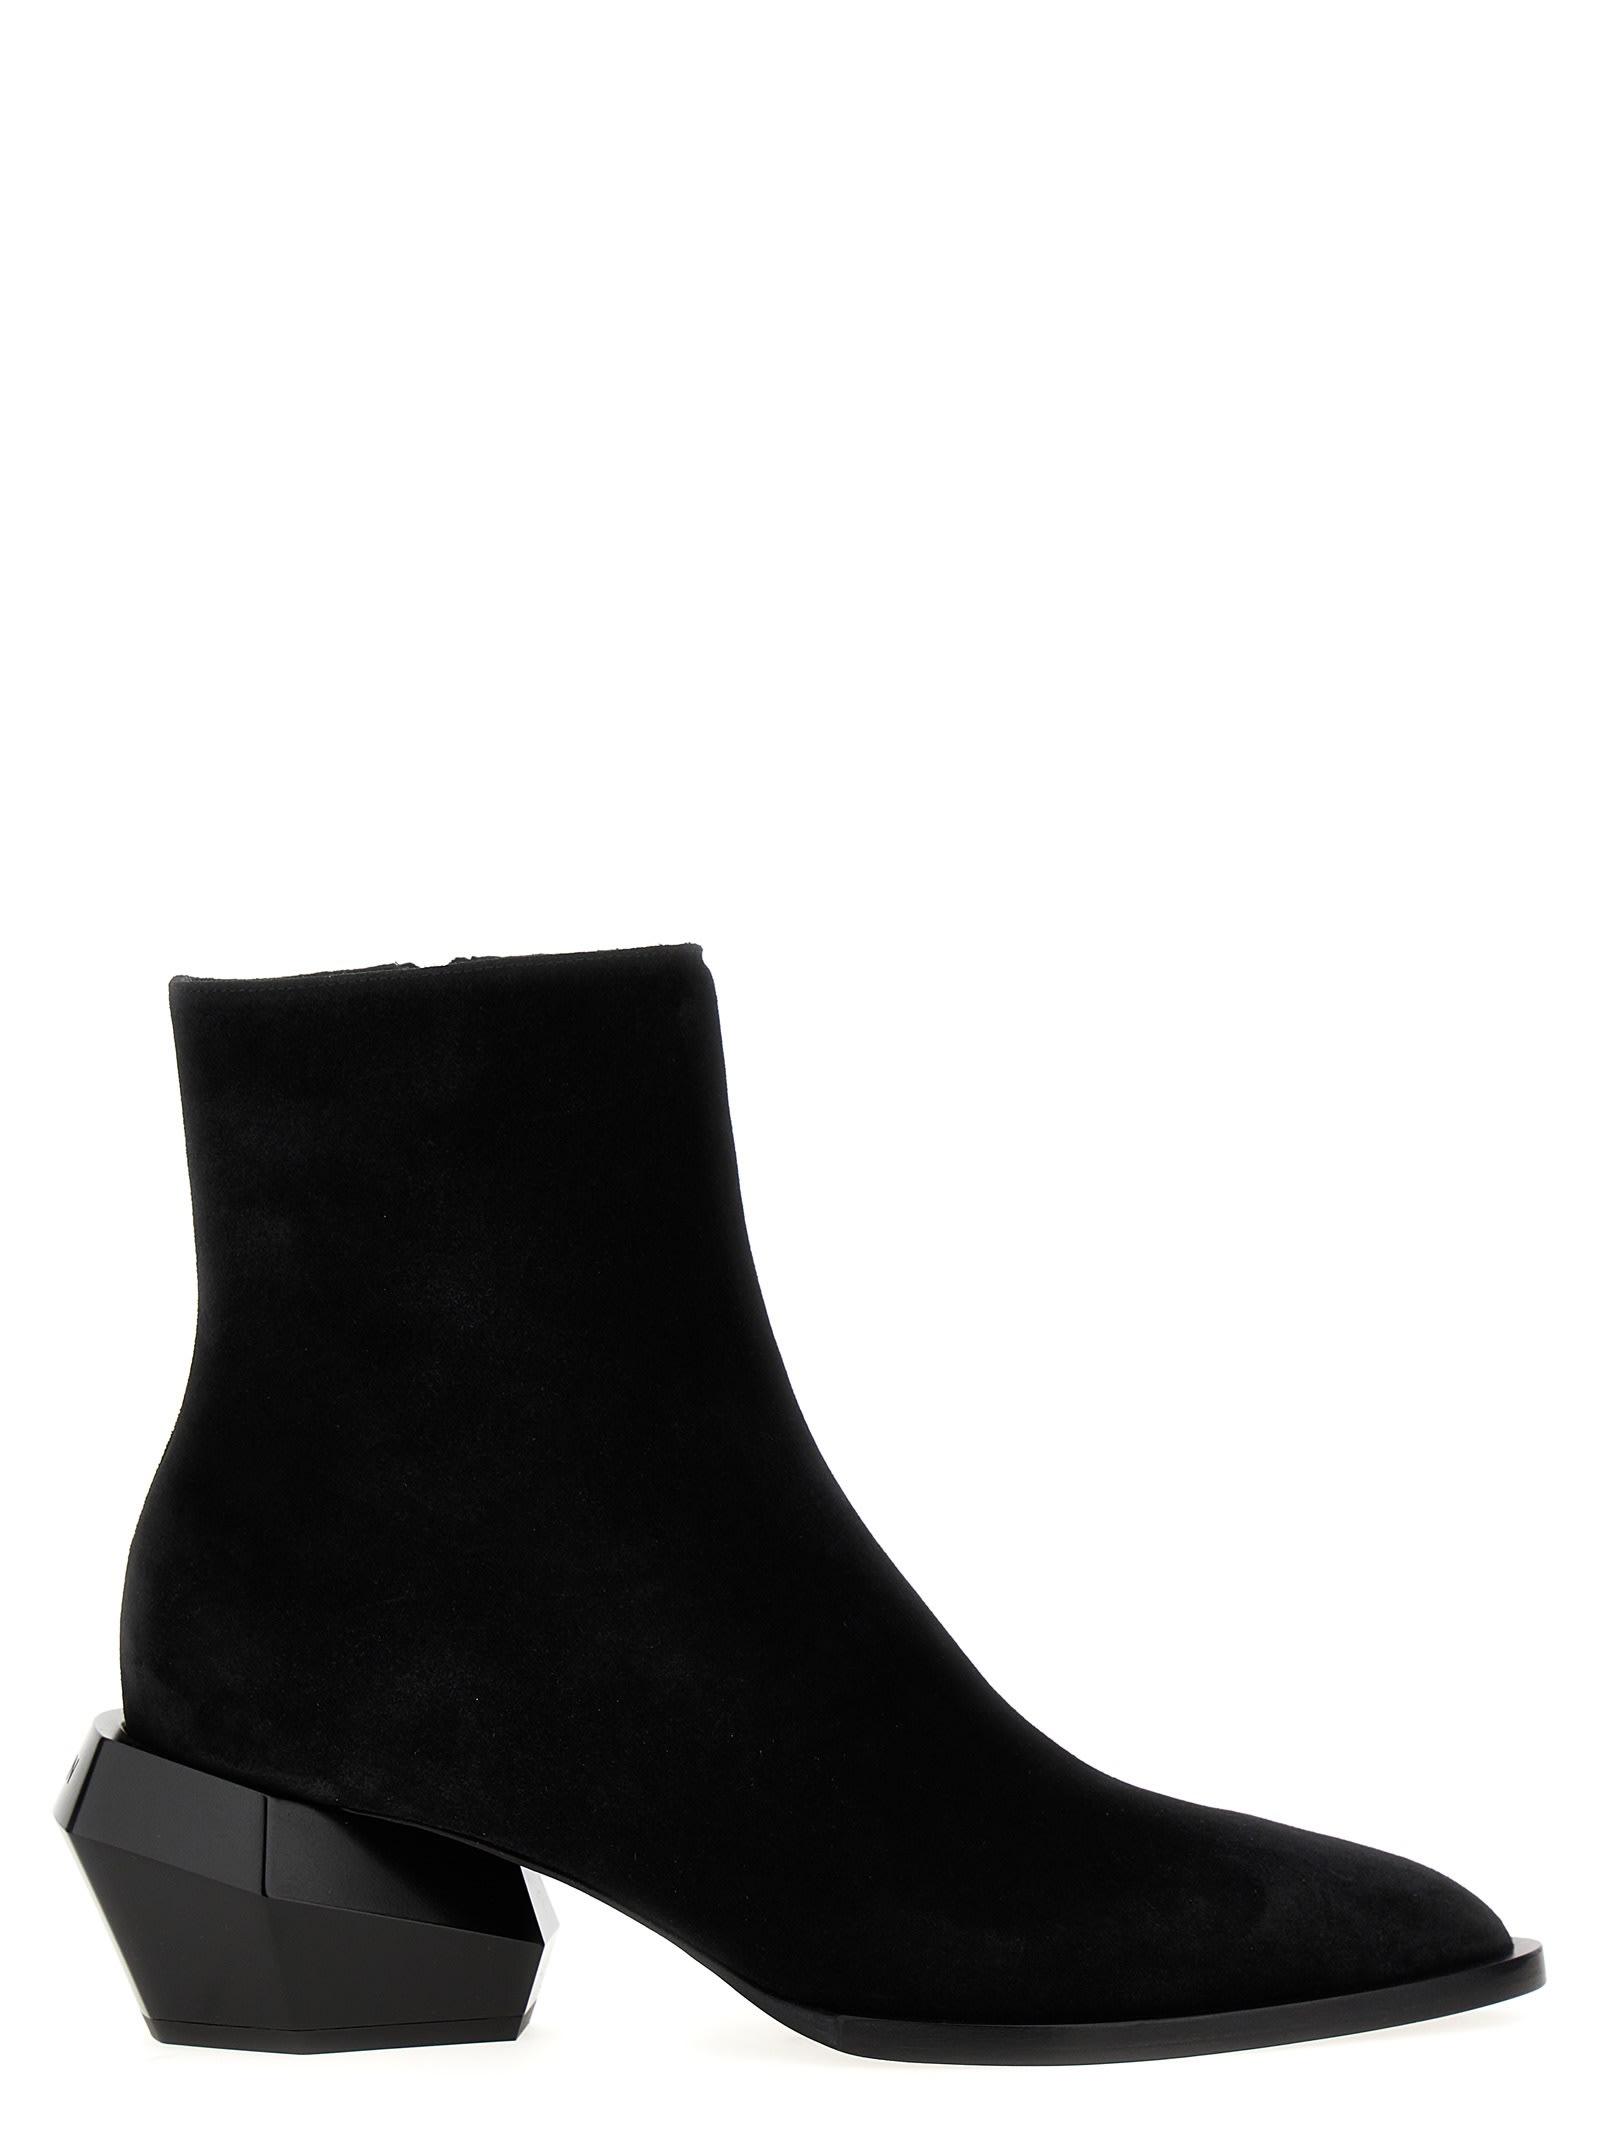 BALMAIN BILLY ANKLE BOOTS